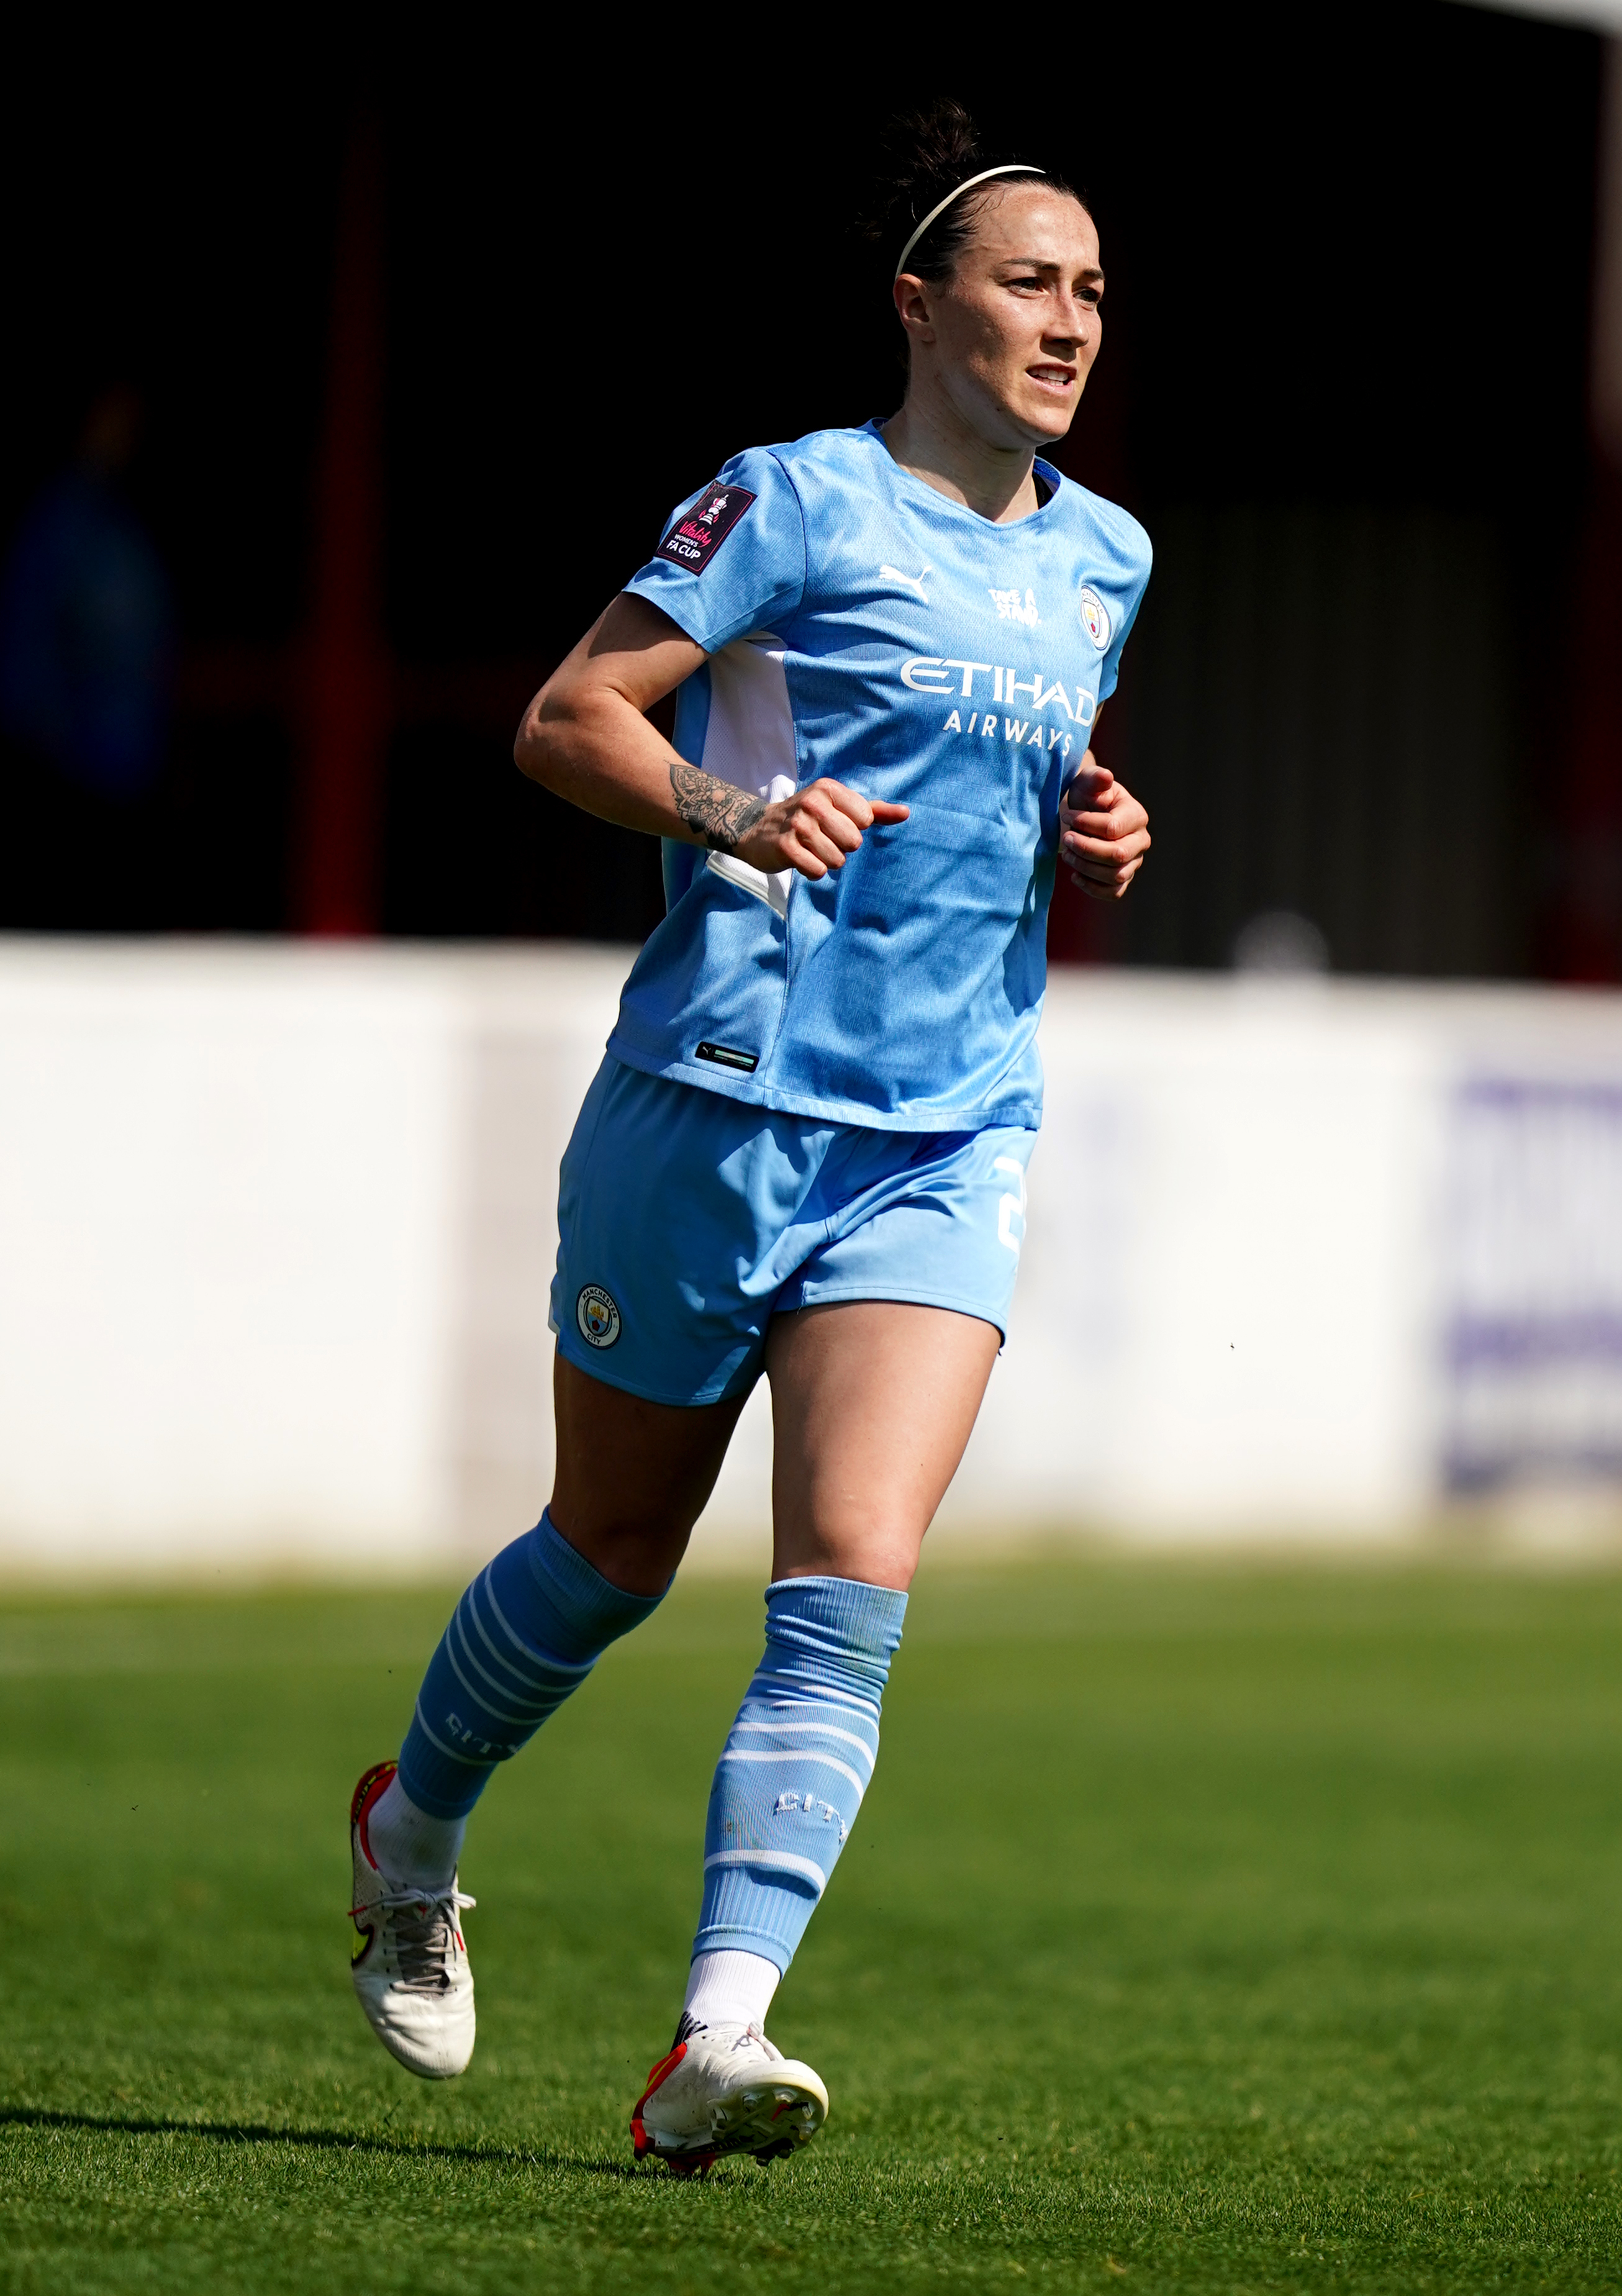 England full-back Lucy Bronze to leave Manchester City